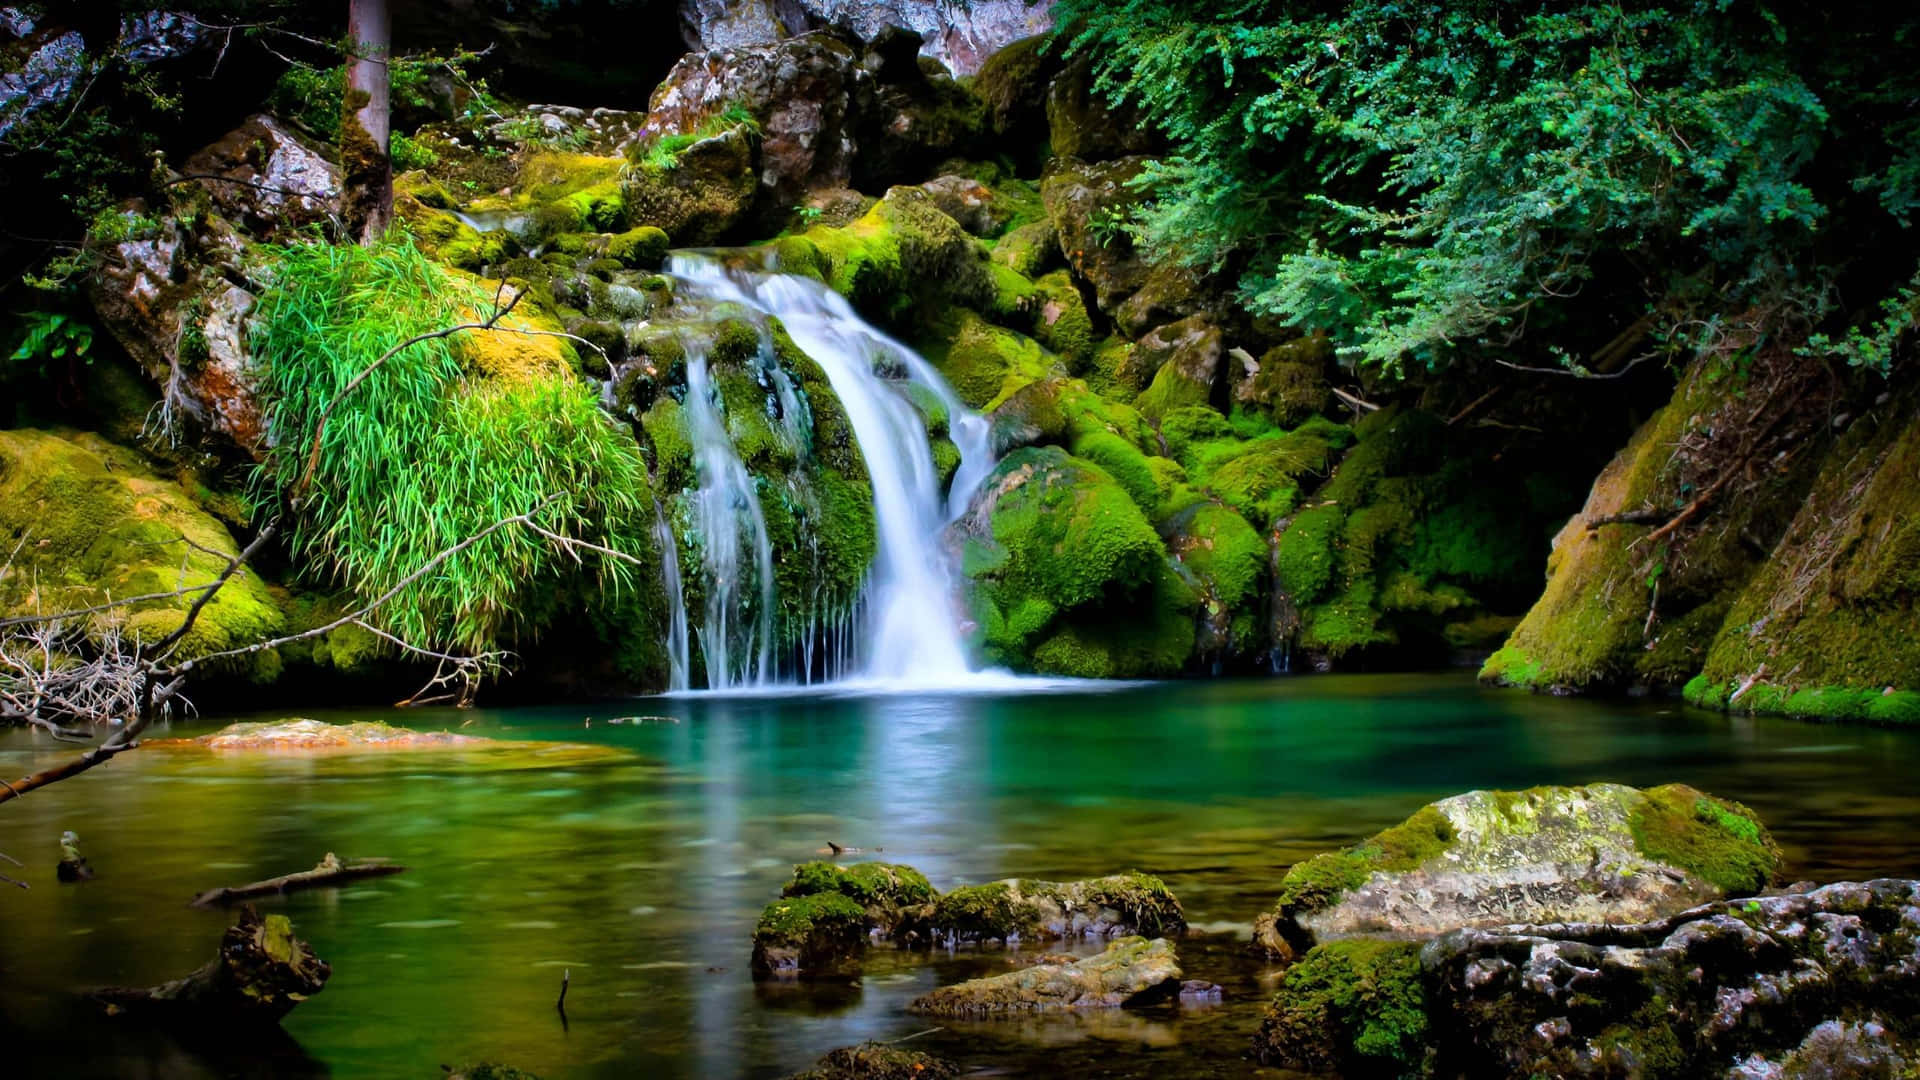 Enjoy the beauty of nature with a 1440P background image